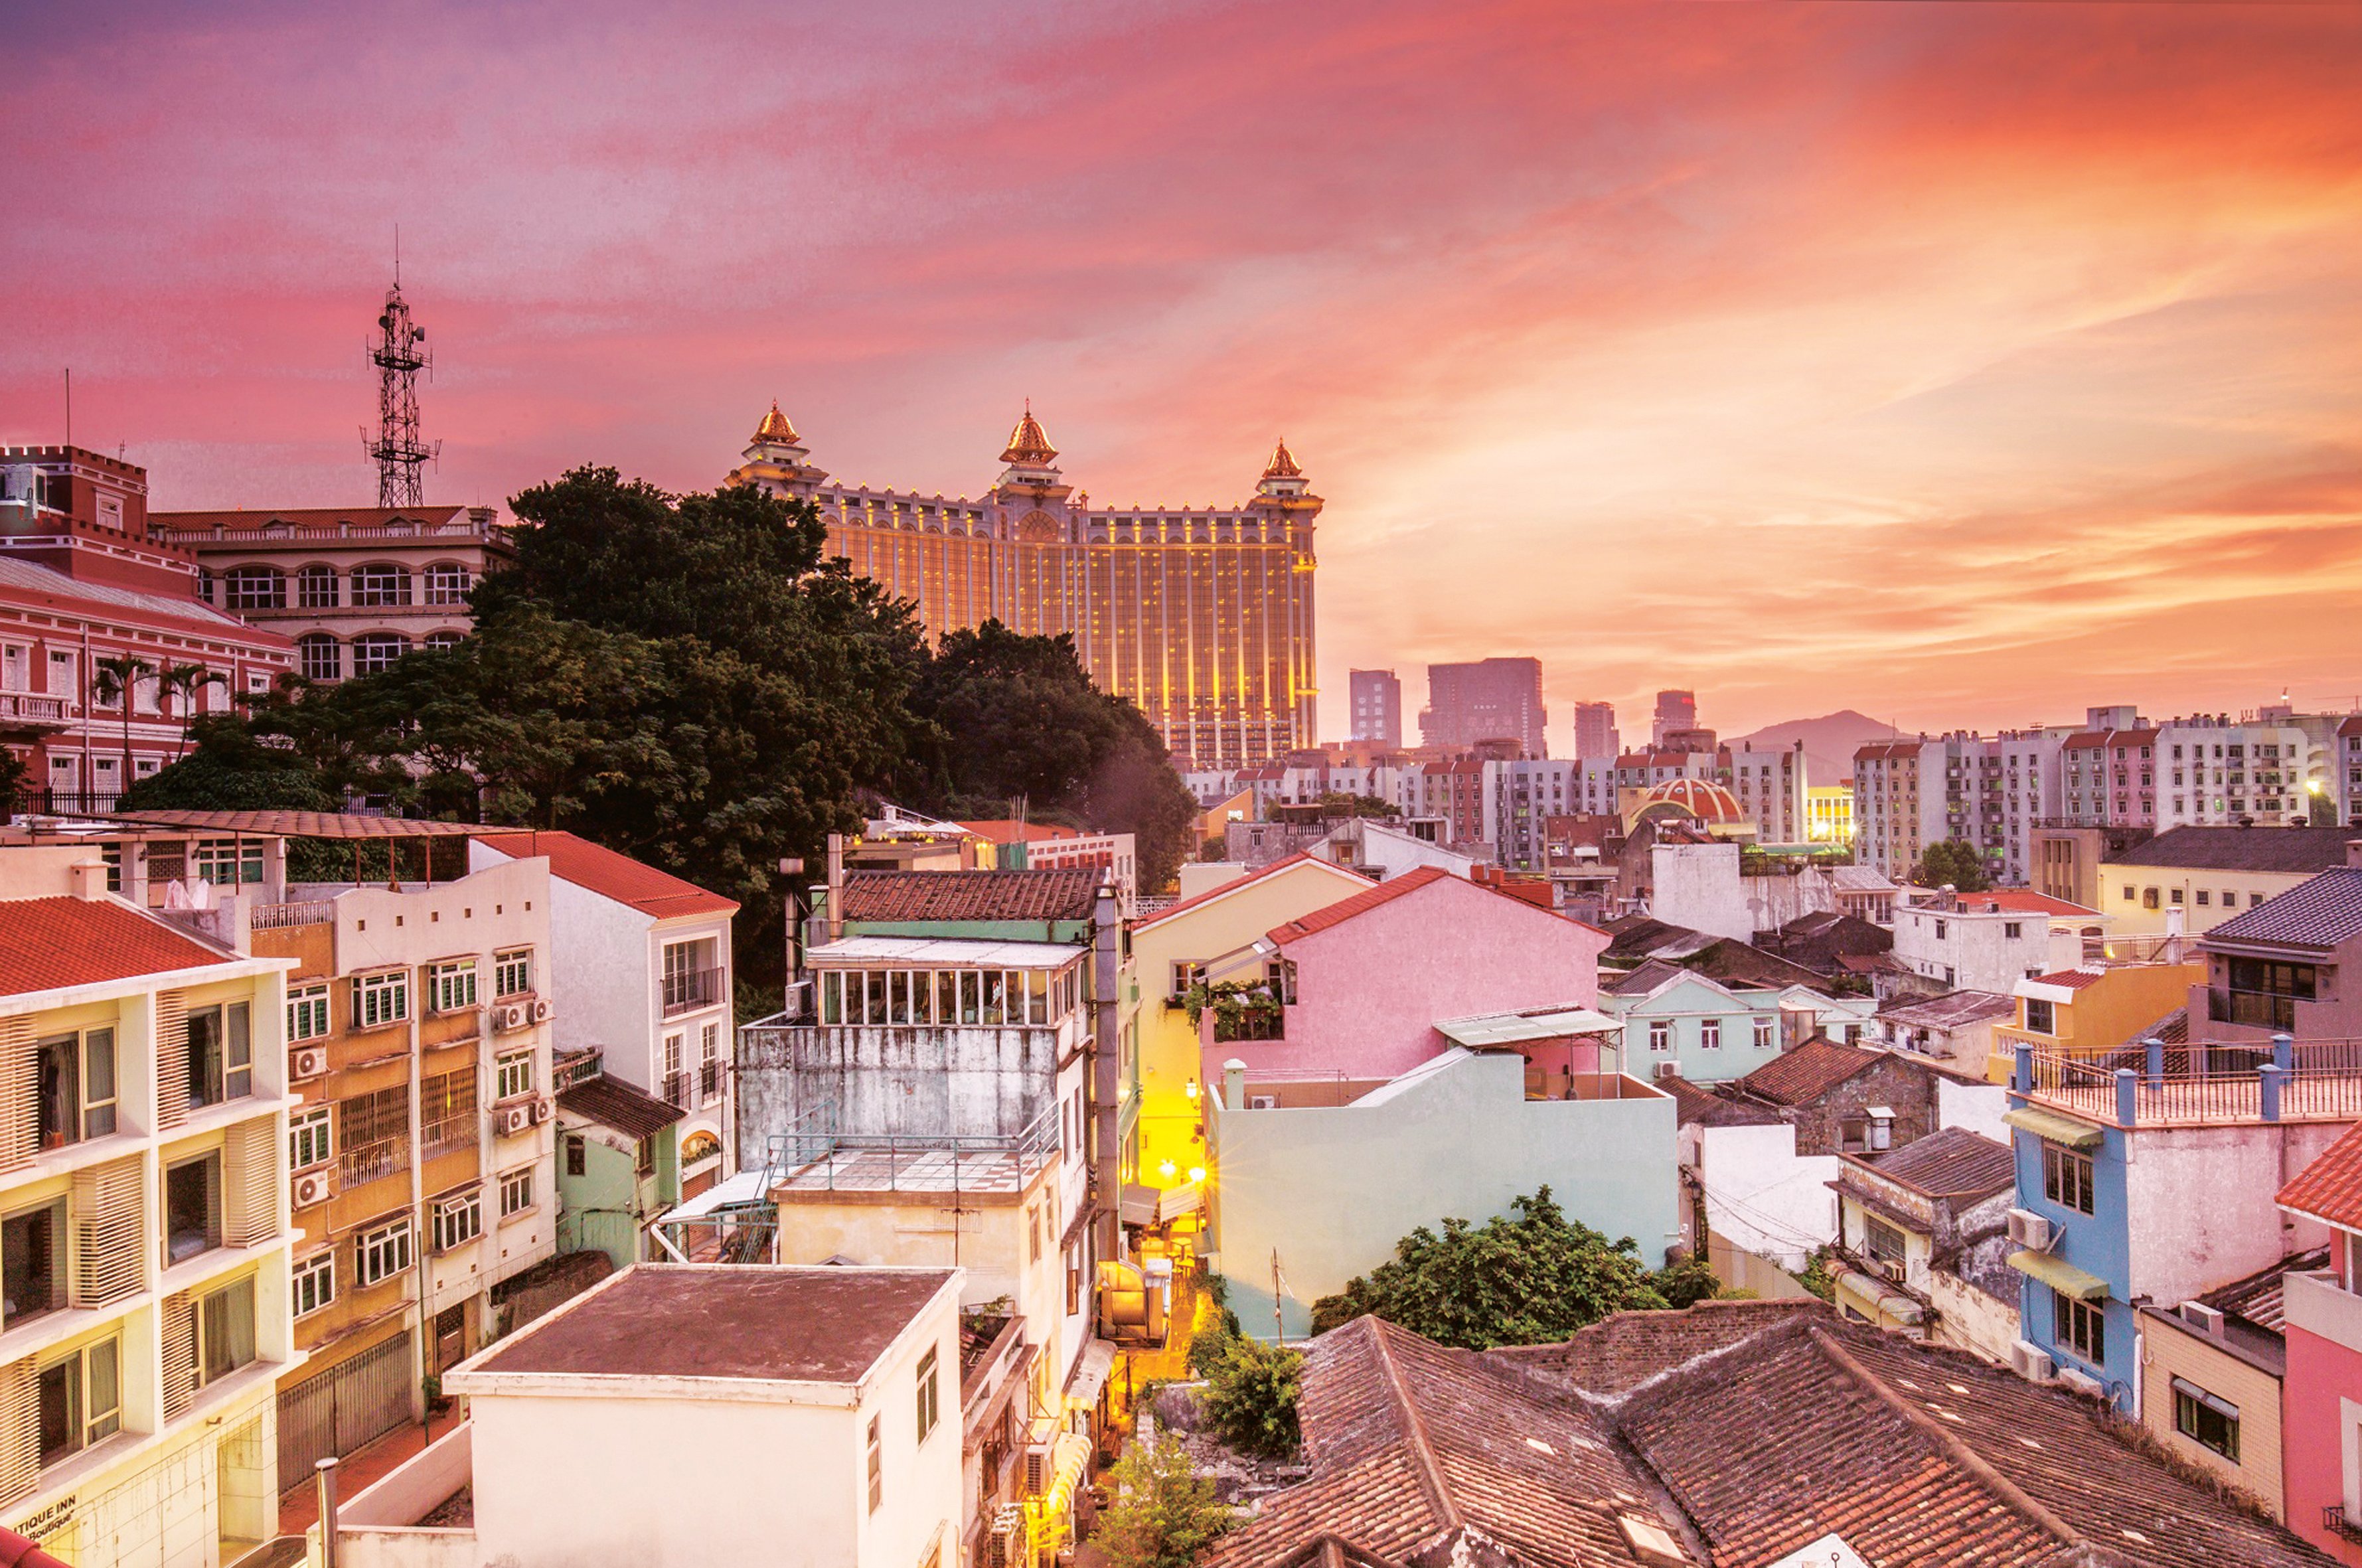 Taipa Village is located in the best-preserved area of historical Taipa Island (Macau).